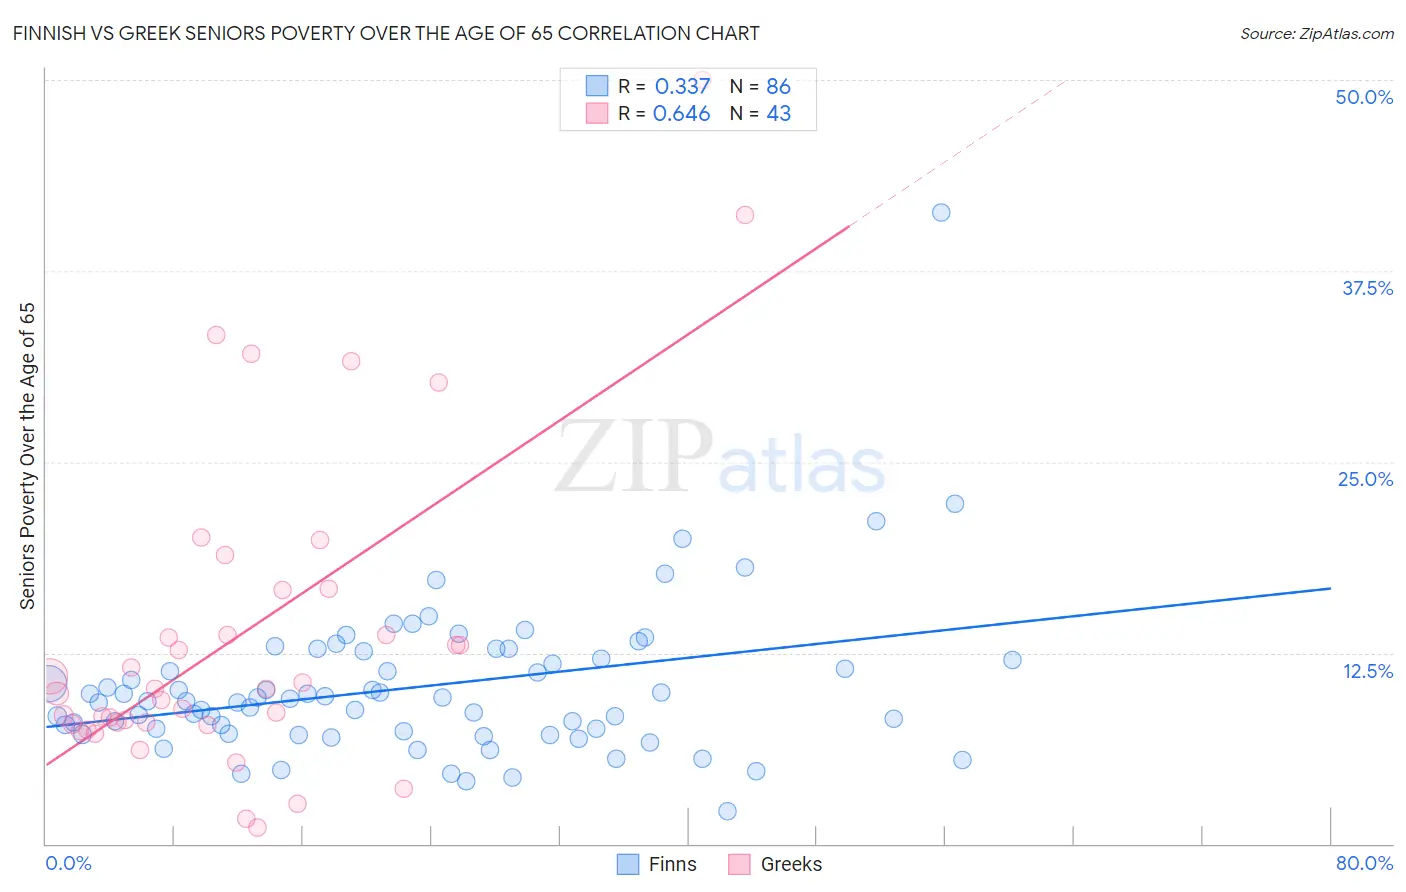 Finnish vs Greek Seniors Poverty Over the Age of 65